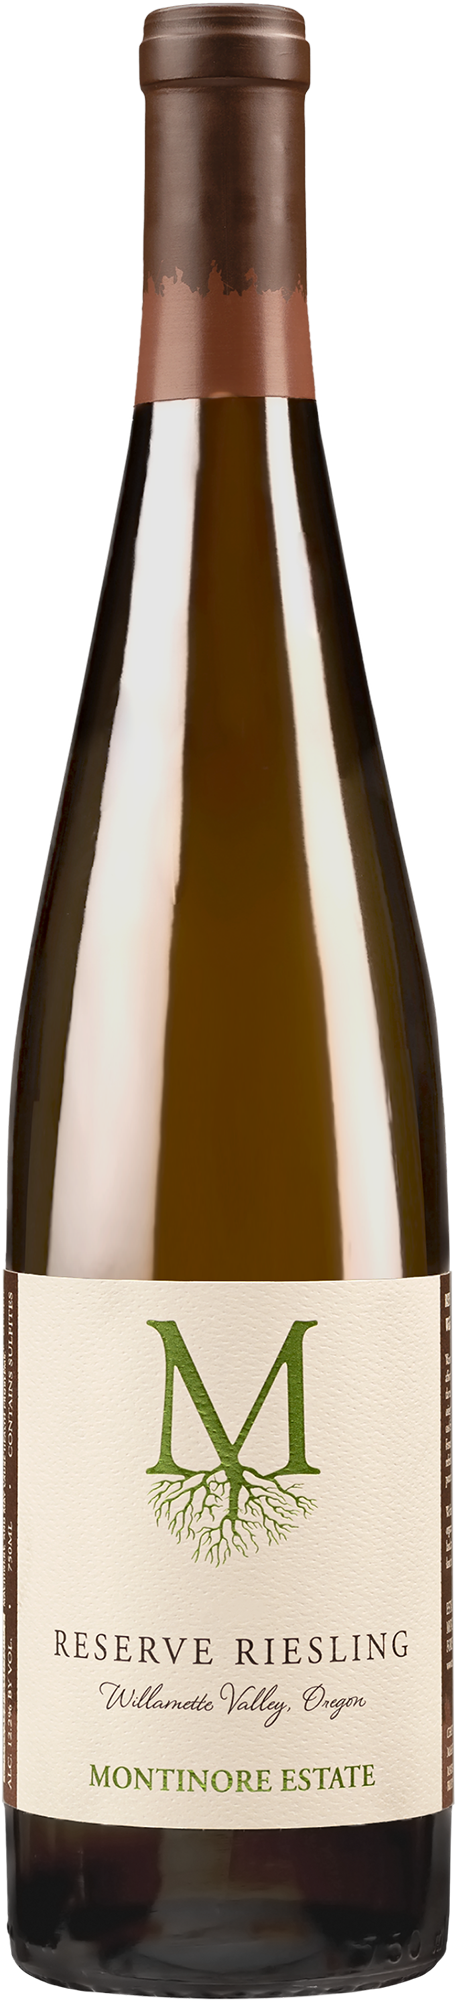 Montinore Estate Reserve Riesling 2018